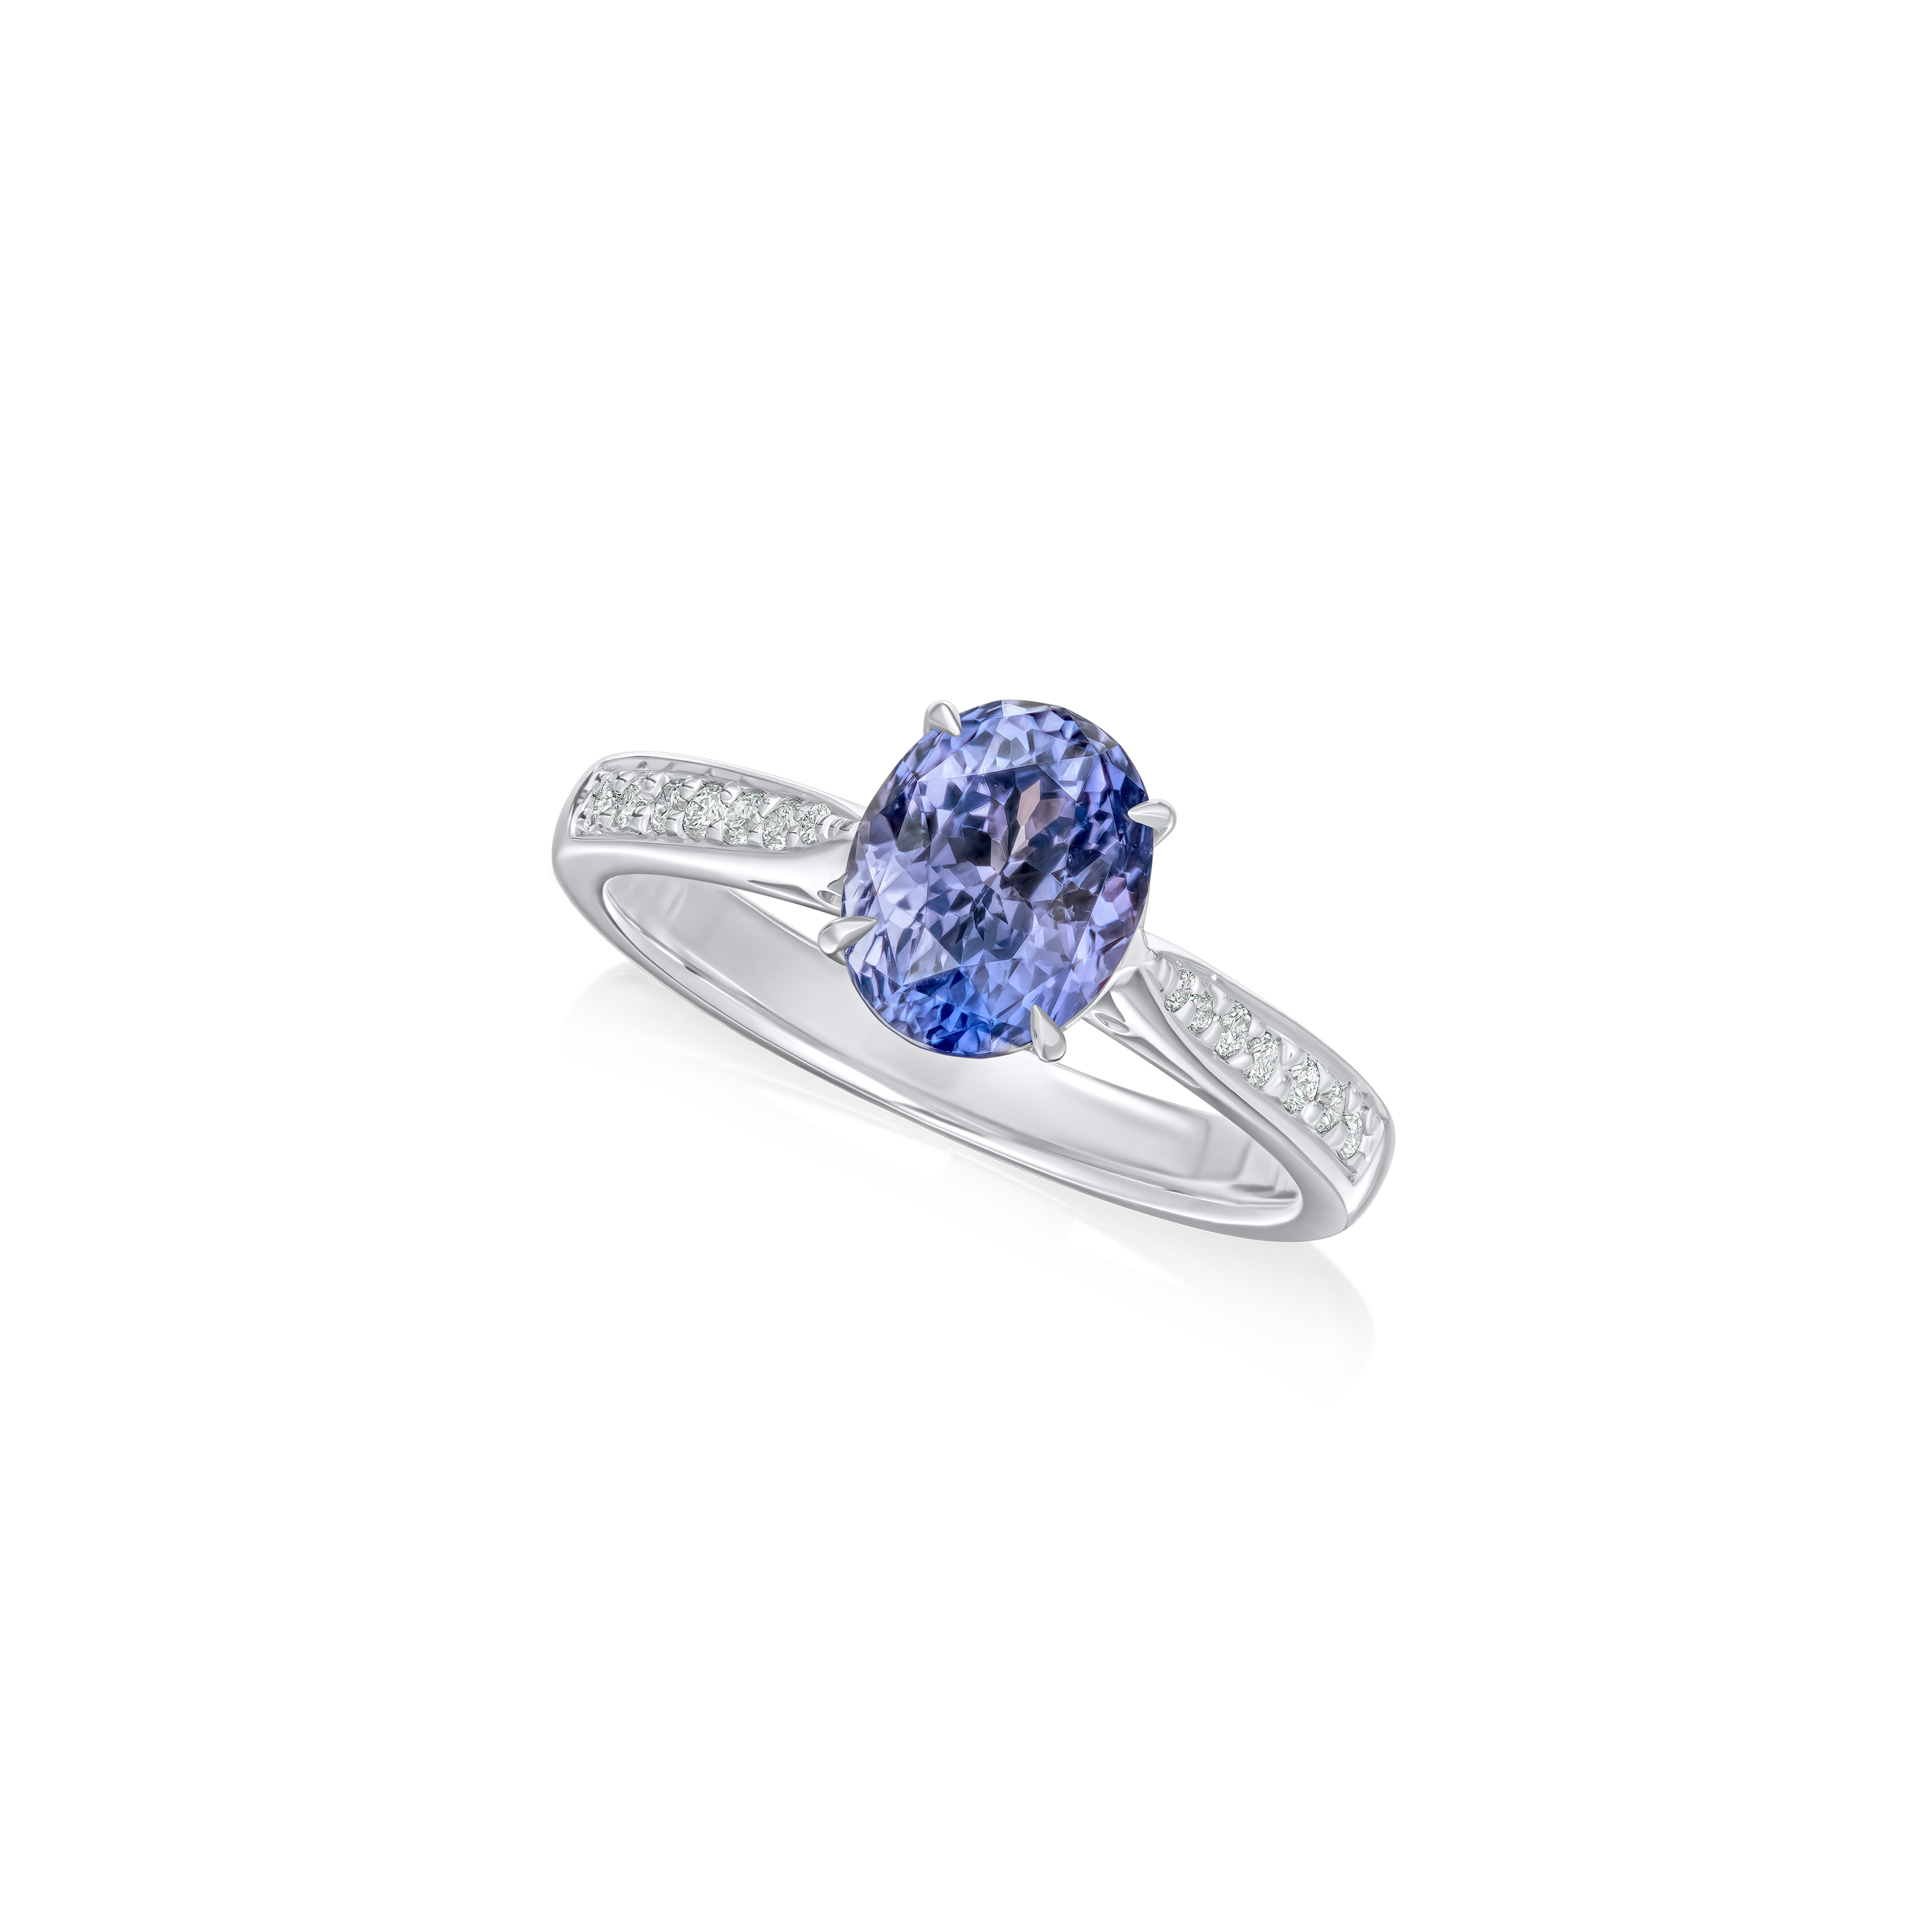 1.87cts Violet Sapphire Ring with Diamond Set Shoulders